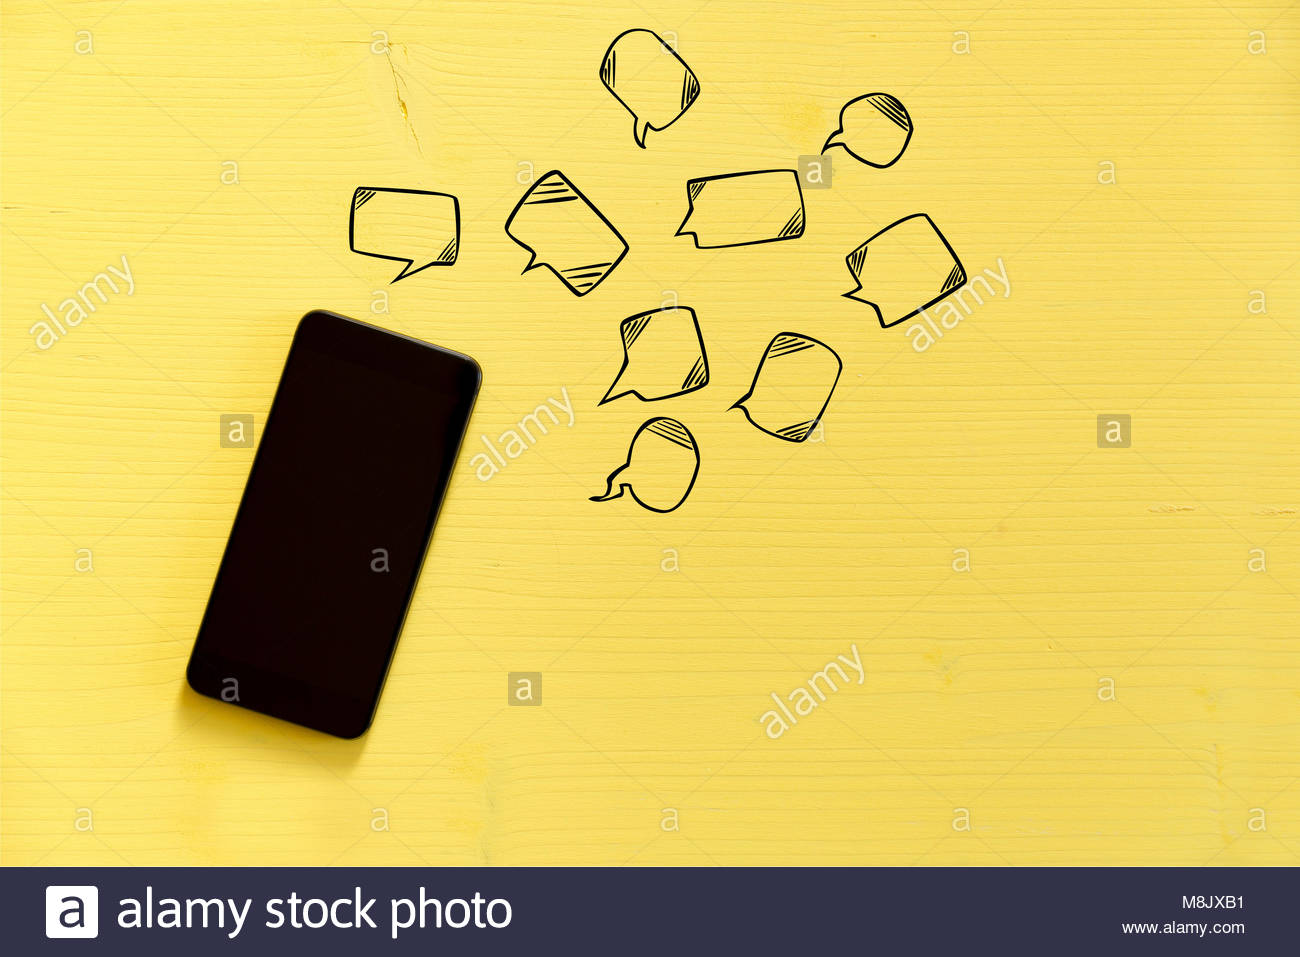 Smartphone On Yellow Background With Text Bubbles Around